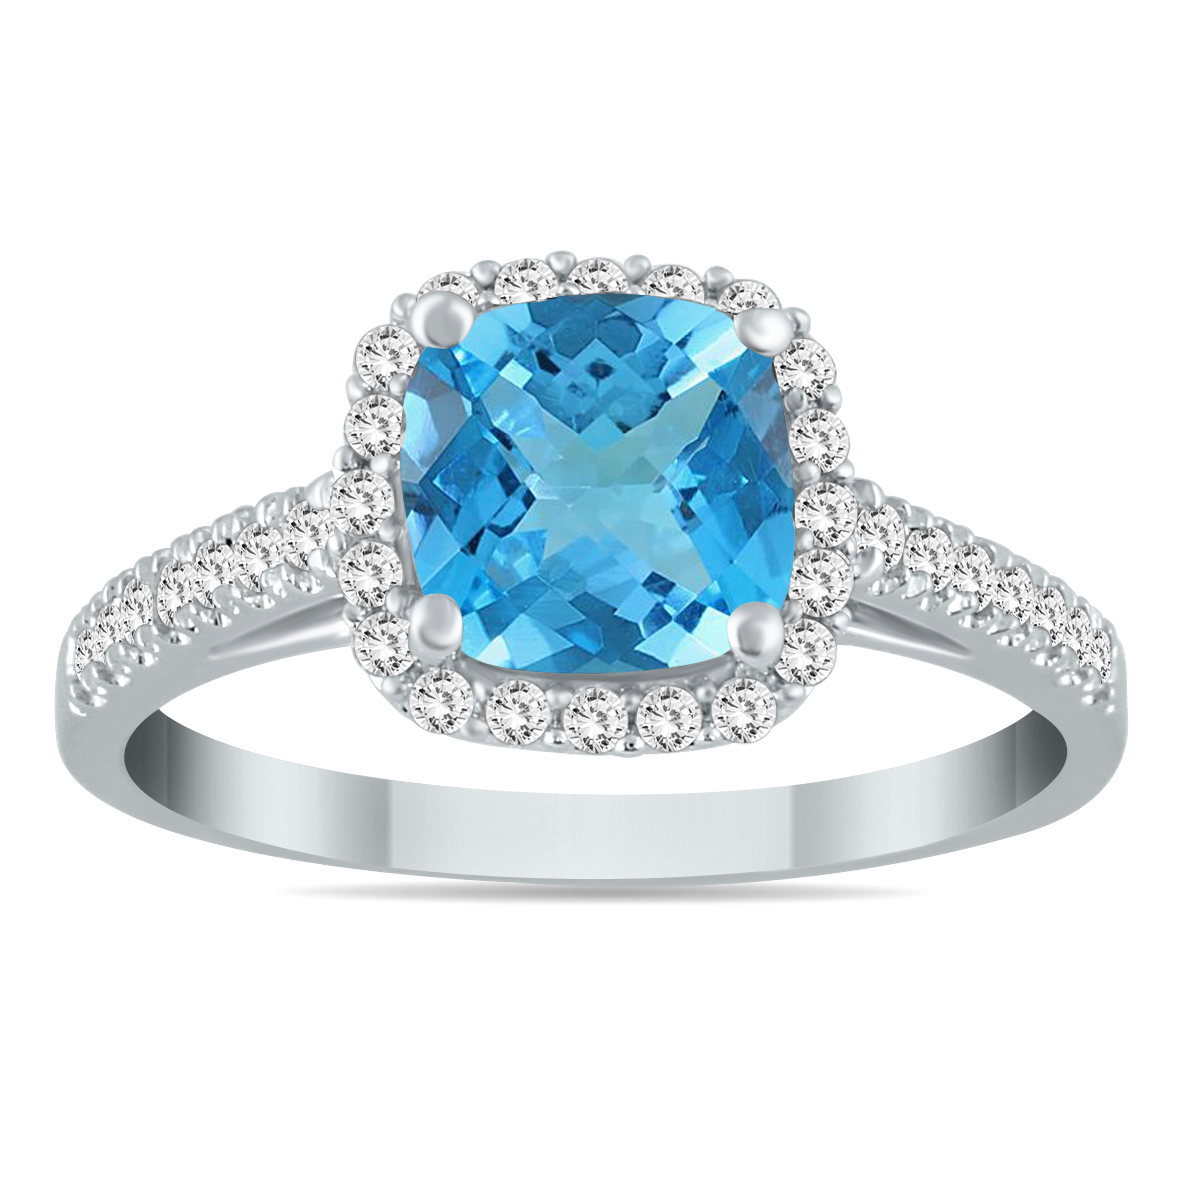 5MM Cushion Cut Blue Topaz and Diamond Halo Ring in 10K White Gold